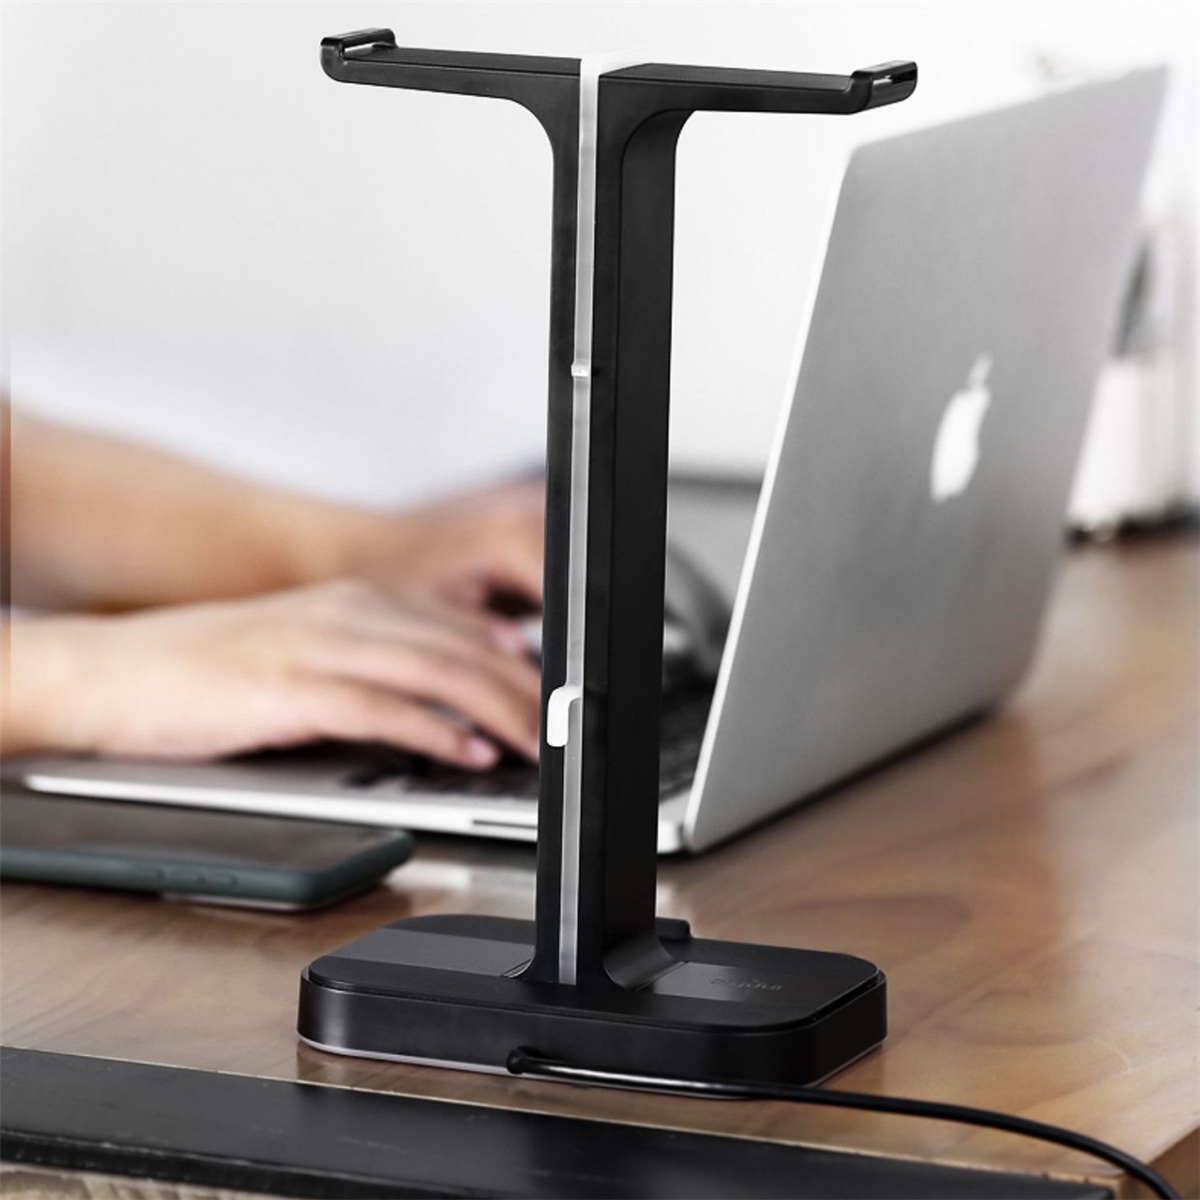 Inphic-H100-Headset-Stand-Dual-USB-Ports-Colorful-Light-Base-Headphone-Hanger-Headset-Mount-Holder-O-1742022-7